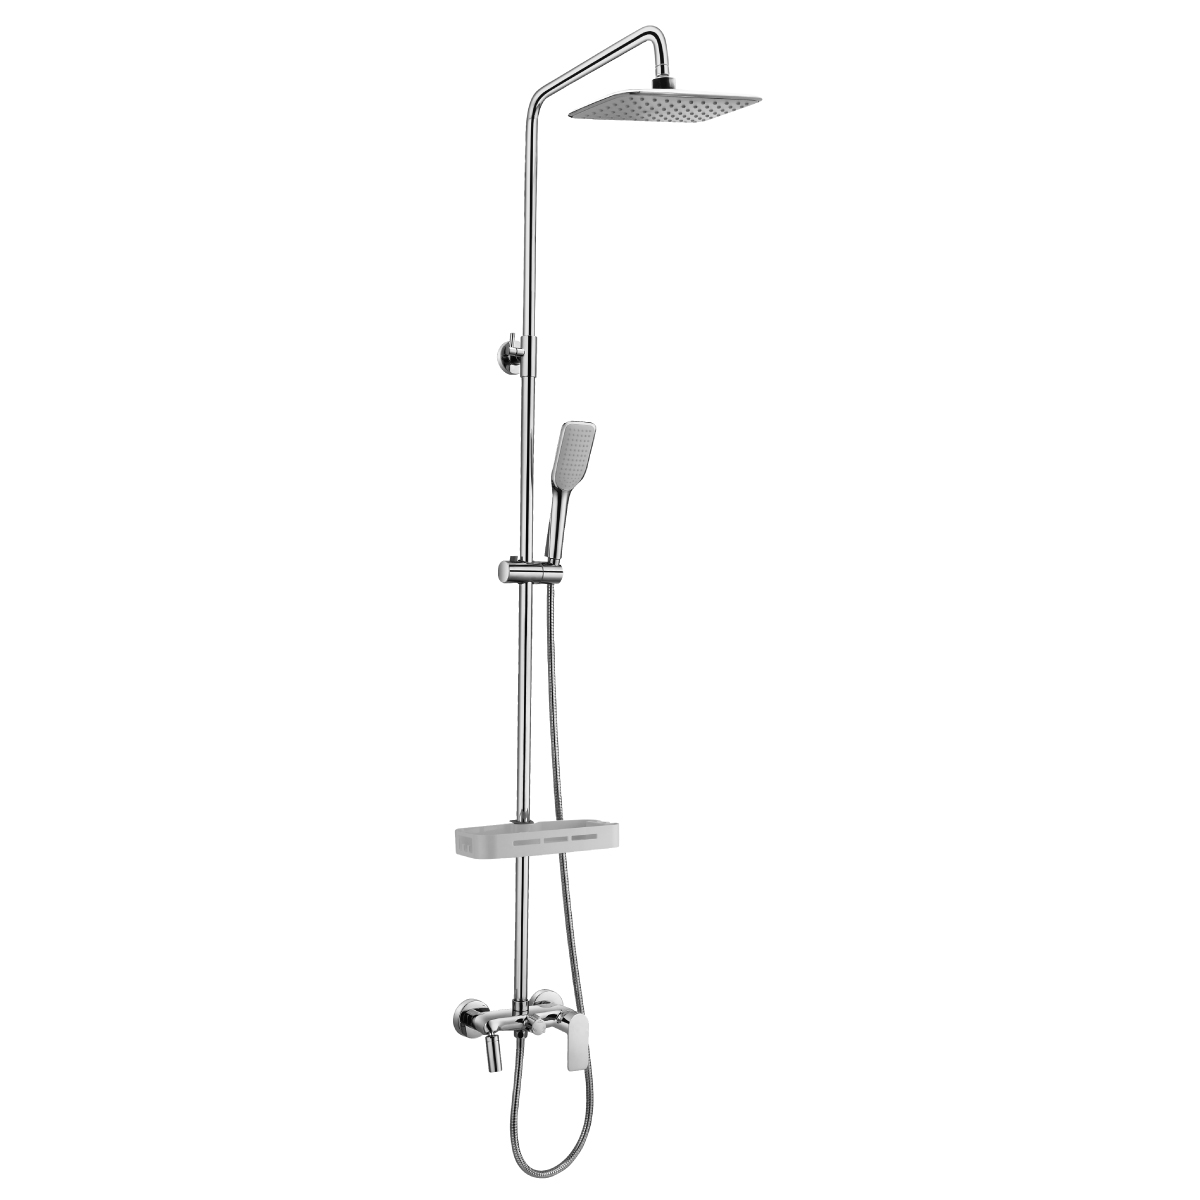 LM7002C Bath and shower faucet with adjustable rod height, swivel spout and «Tropical rain» shower head